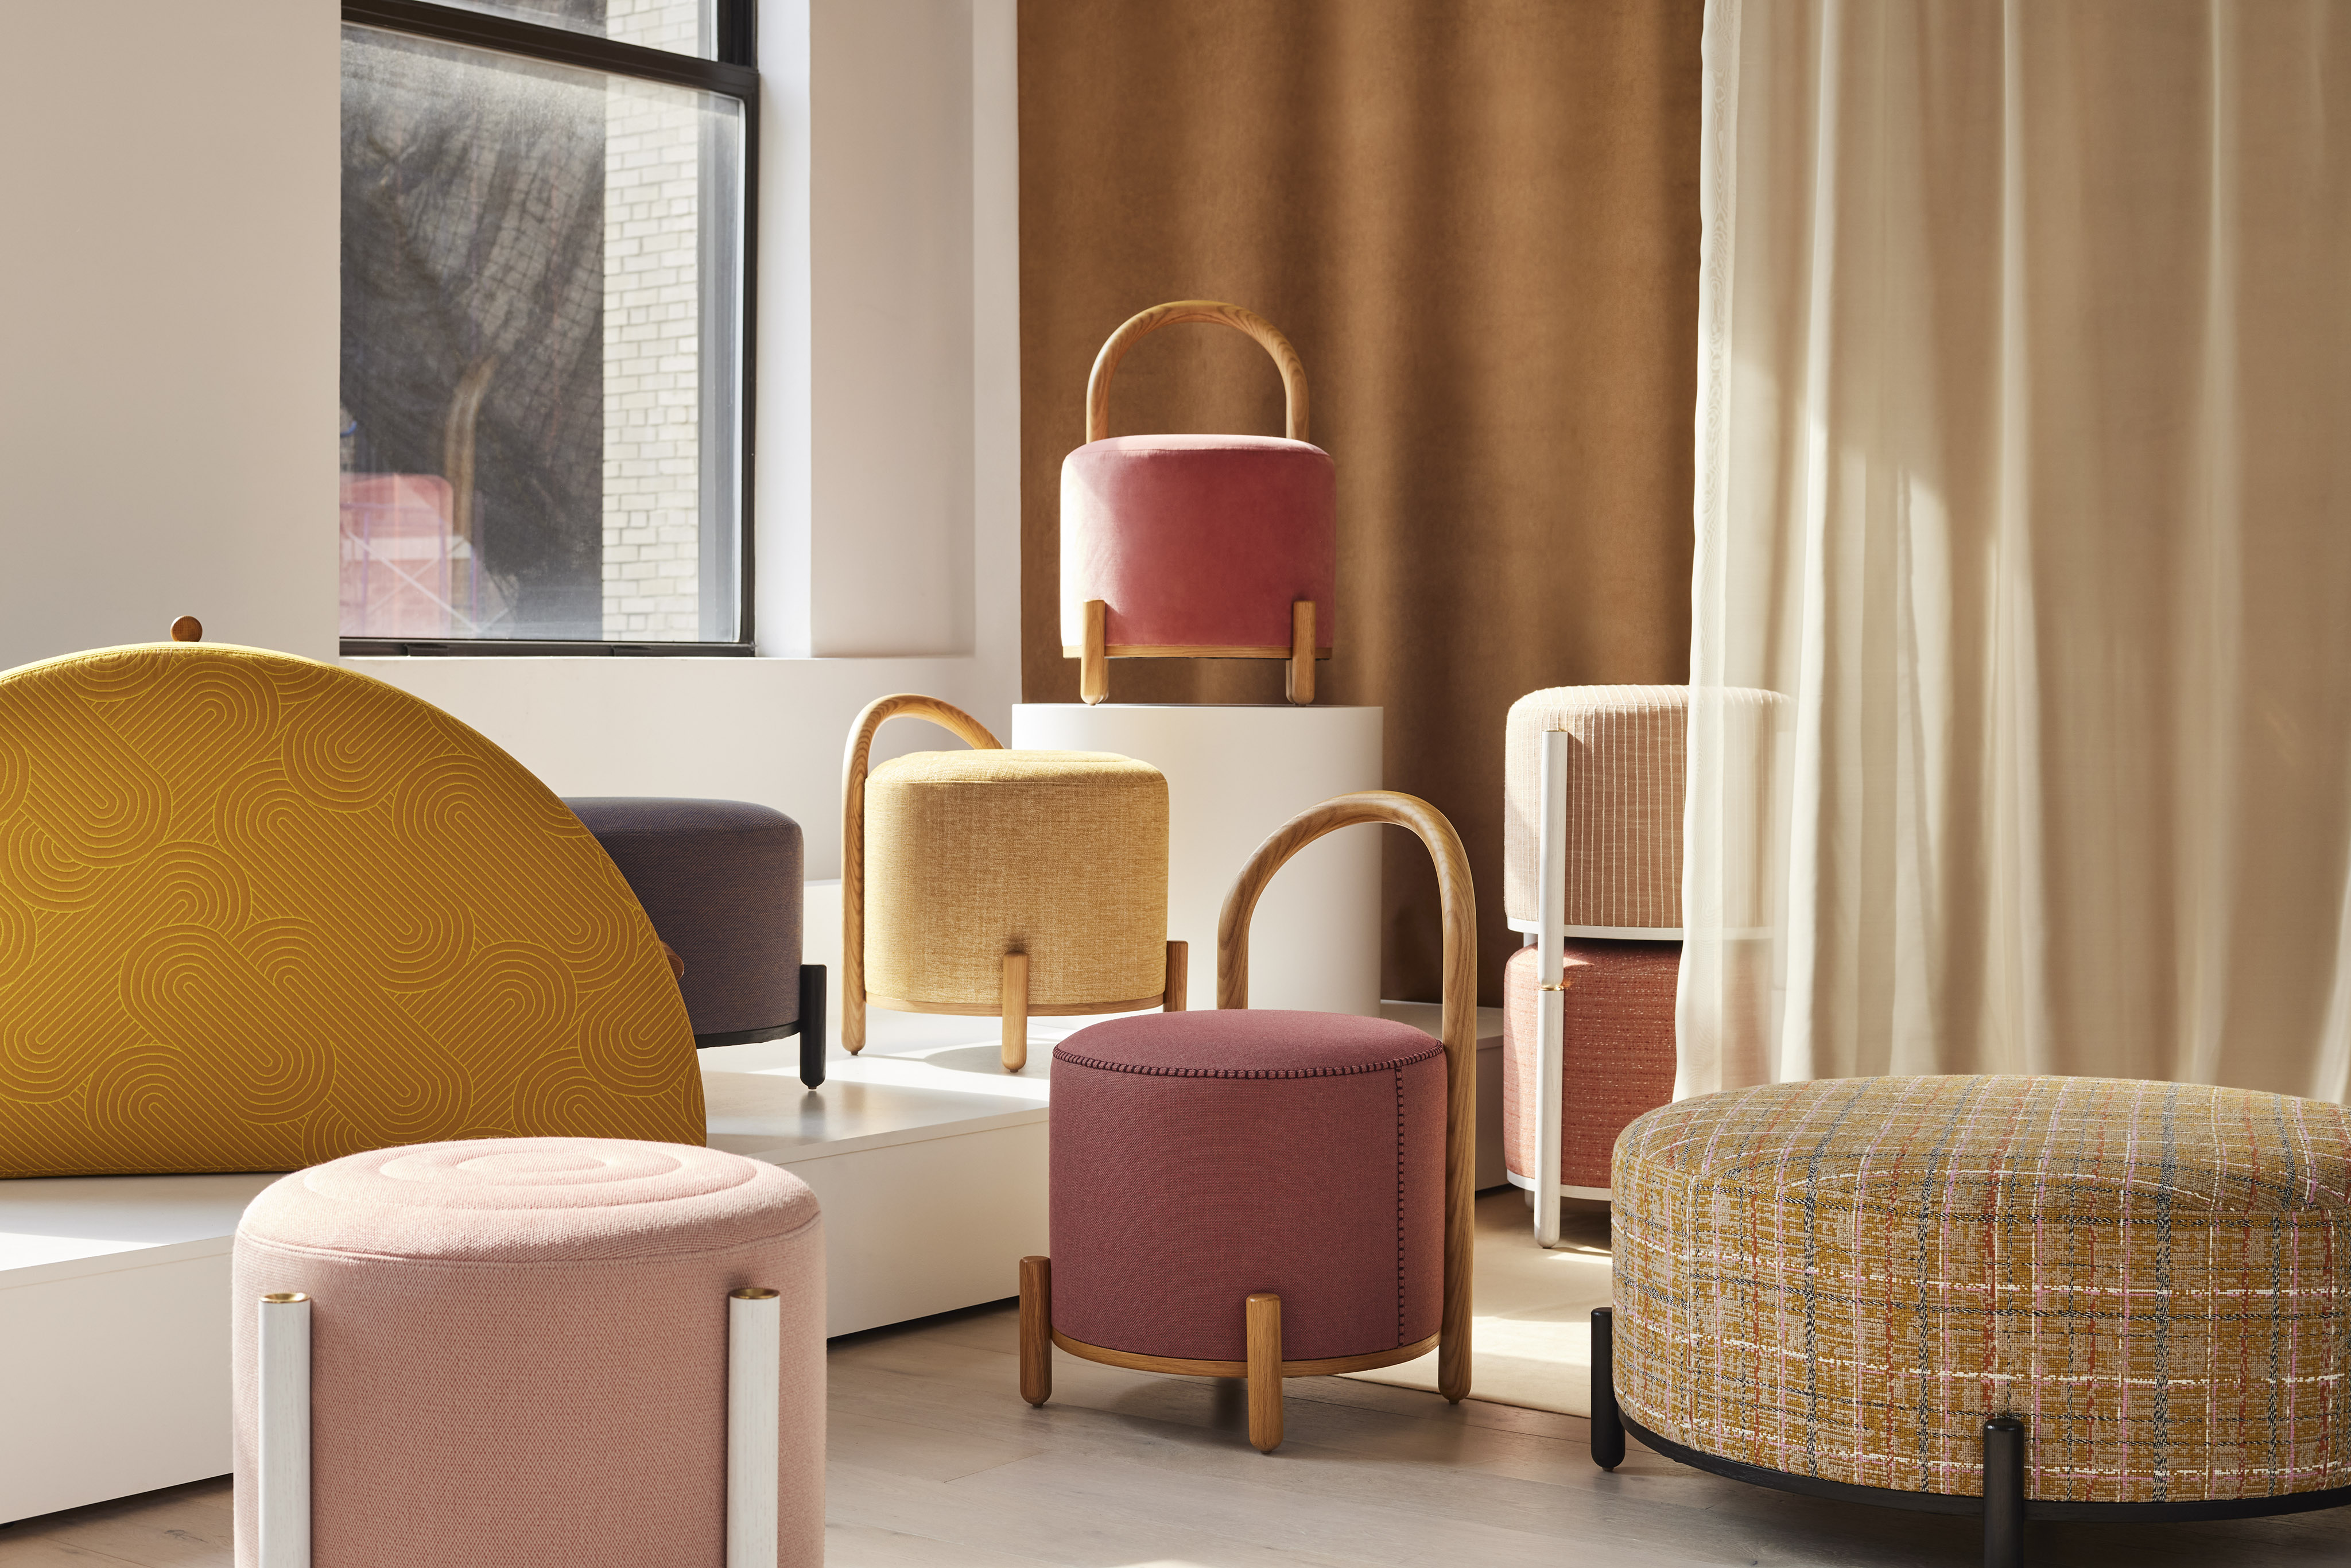 The Bao seating line from Alda Ly Architecture and HBF is meant to meet a range of needs